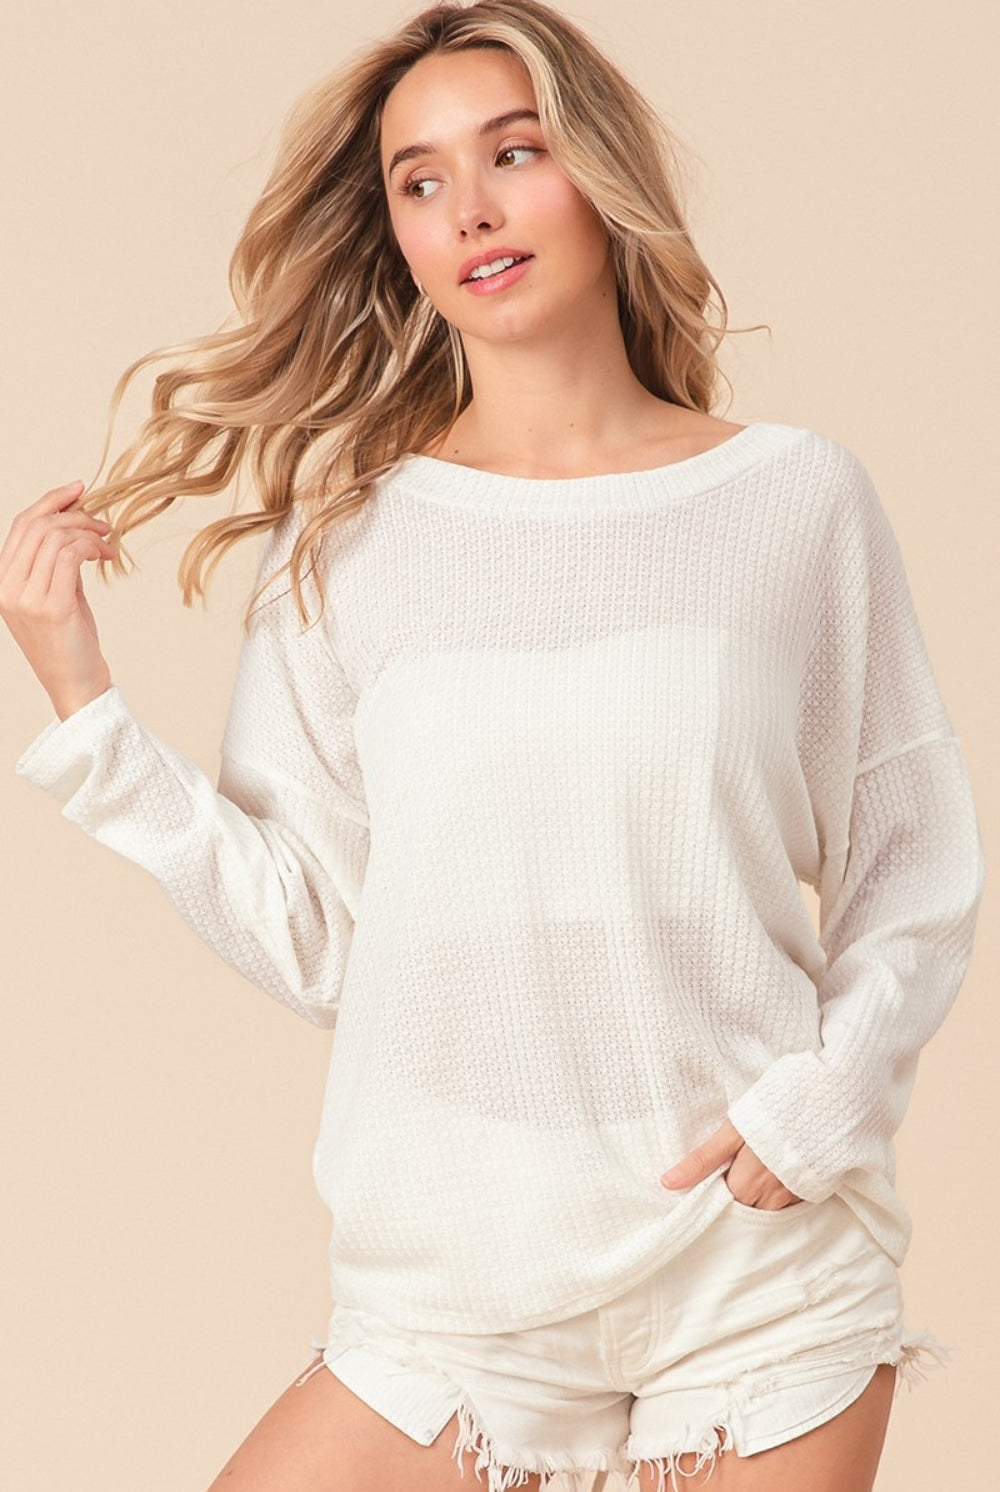 A relaxed-fit, waffle-knit top with long sleeves and an adjustable tie-back detail, blending comfort with a hint of allure.